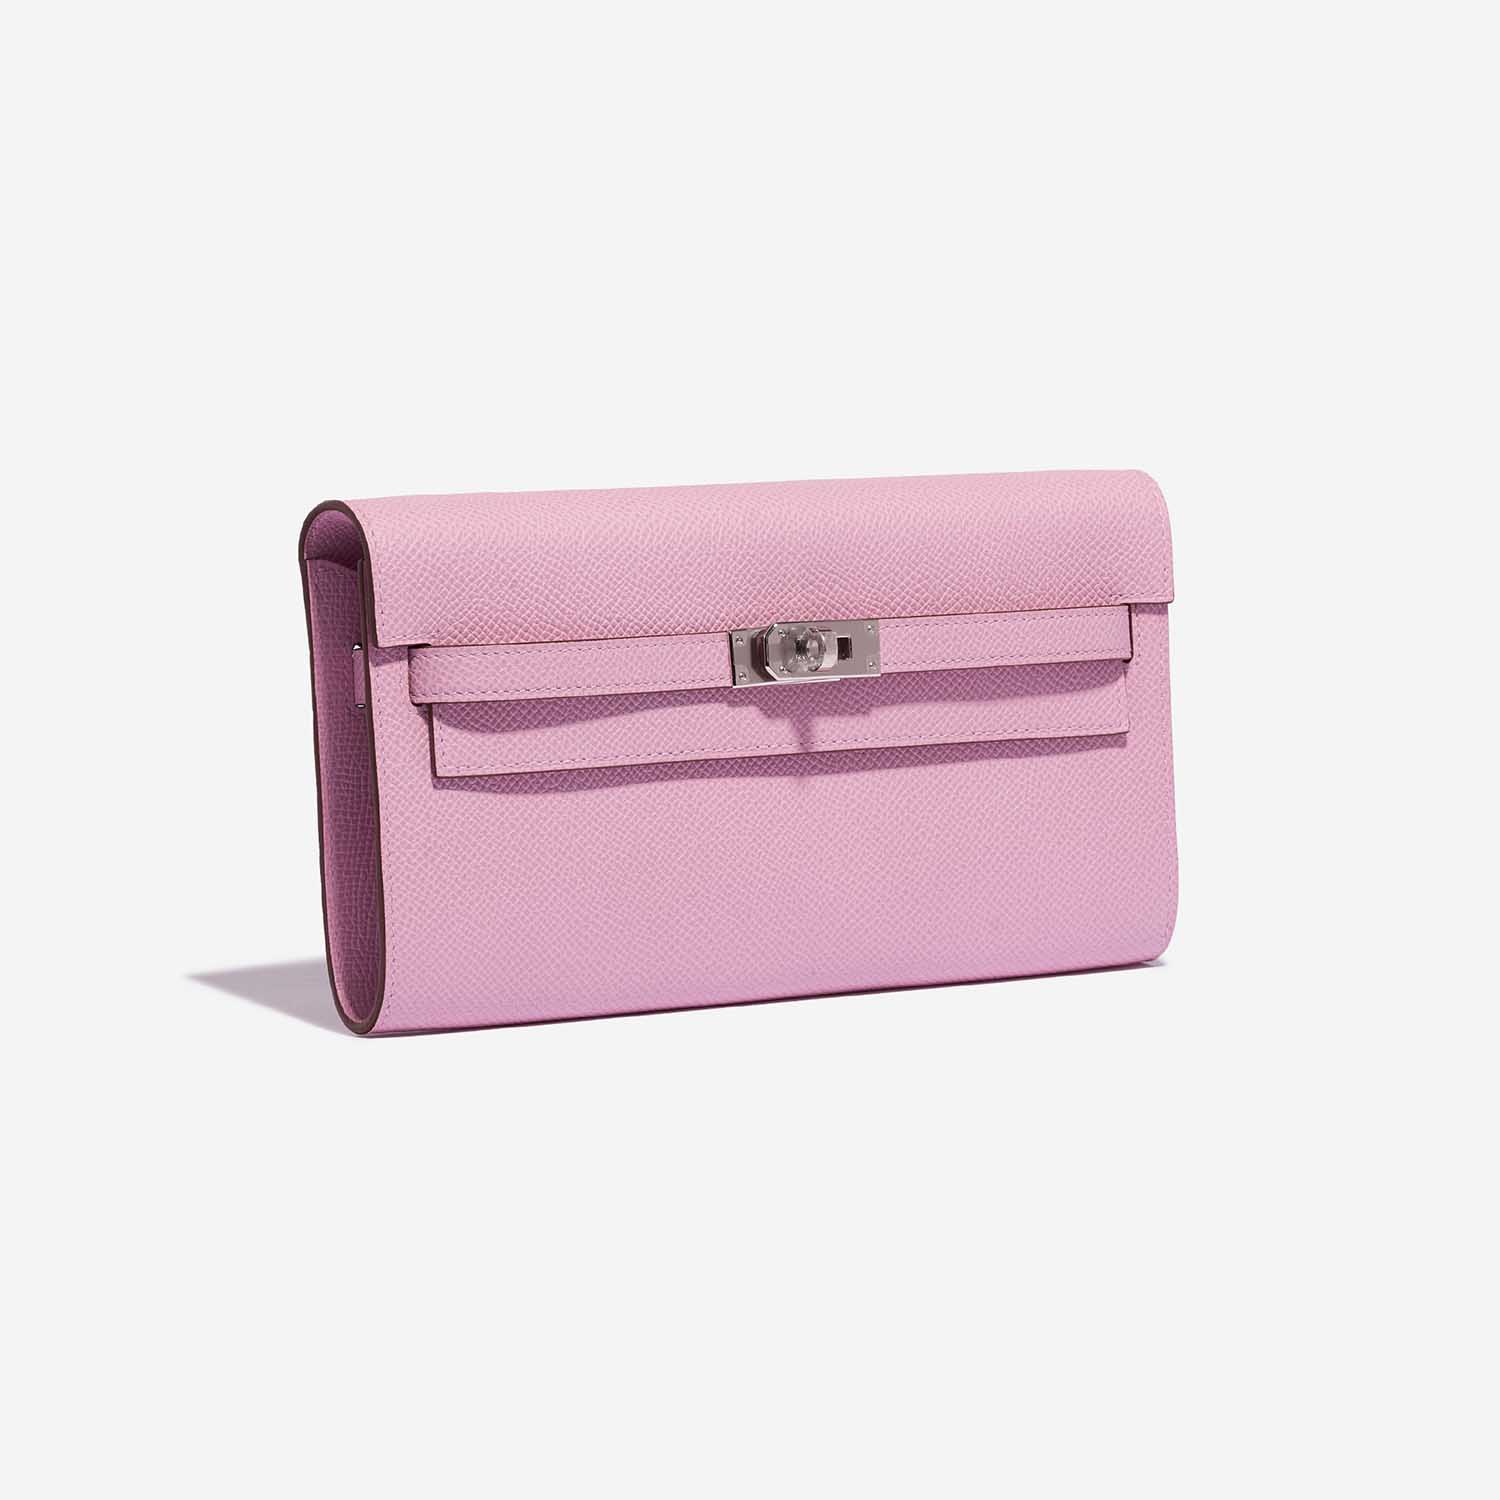 Haya Gl - Kelly Pochette in Mauve // One of my top picks for my  Summer '22 trip. Willing to go 1:1 for this as well if I am not successful  in Paris.